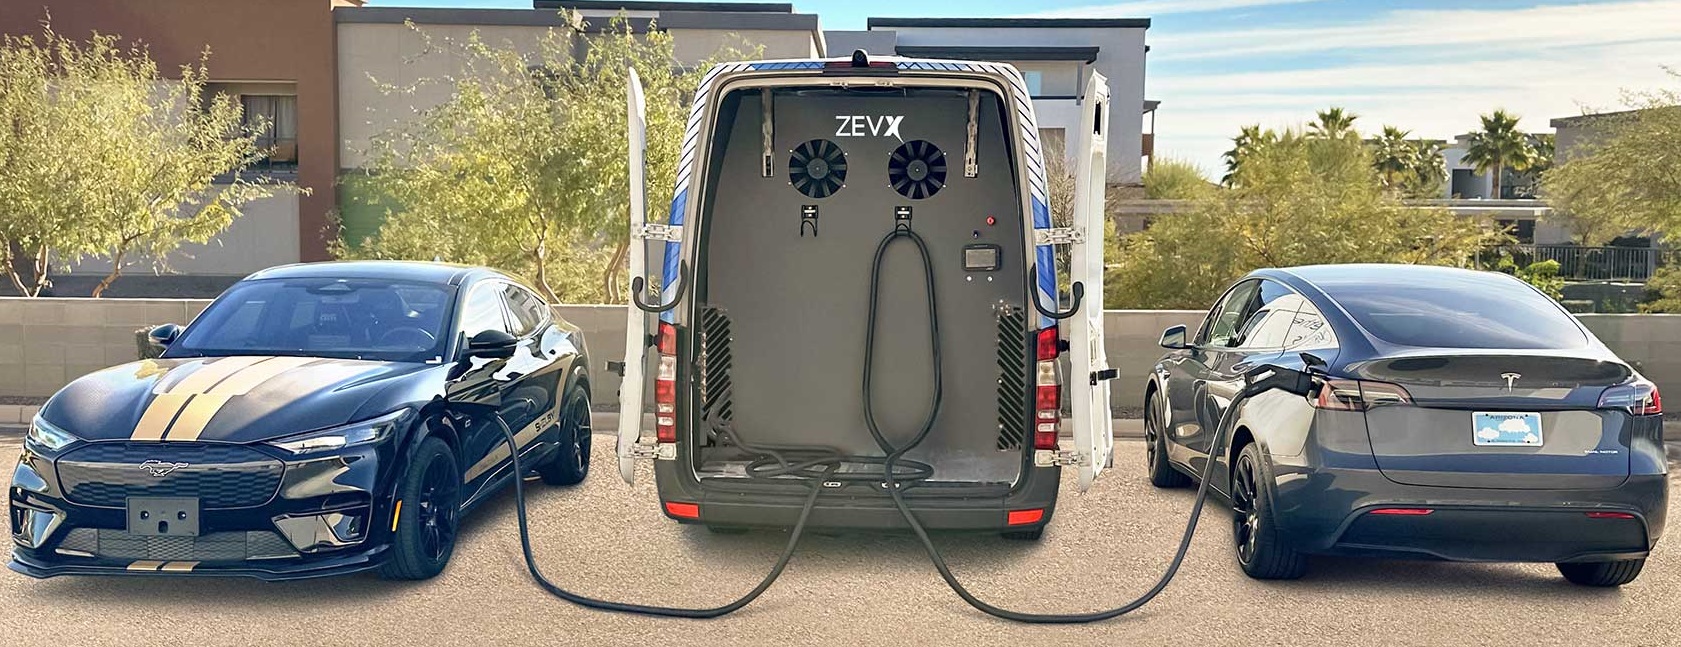 ZEVx says its MCU technology addresses the insufficient charging infrastructure that has slowed the adoption of electric vehicles. Photo: ZEVx